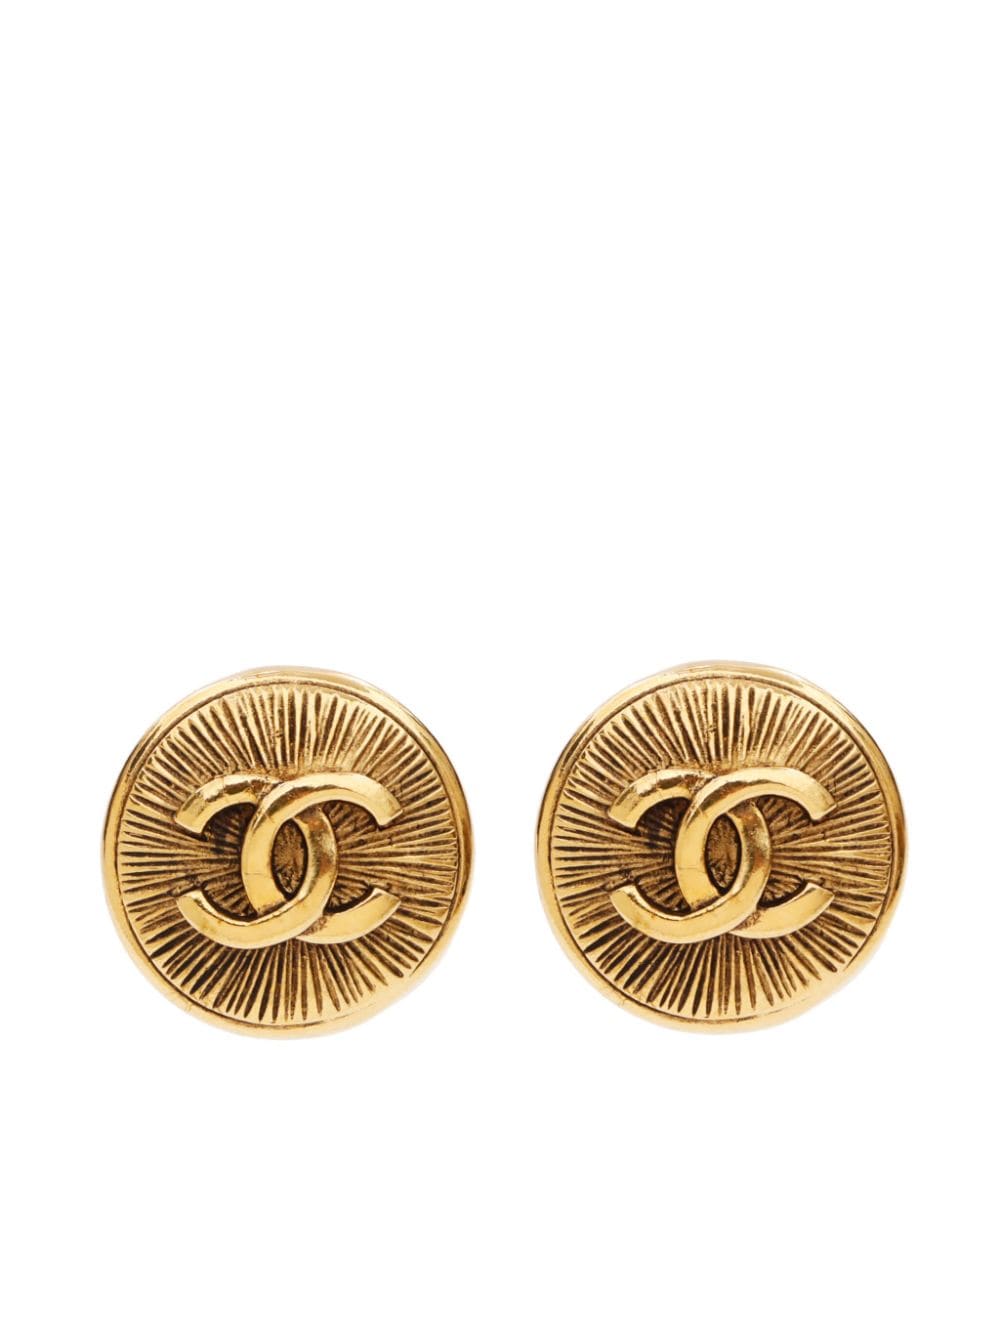 Pre-owned Chanel 1986-1994 Cc Gold-plated Clip-on Earrings